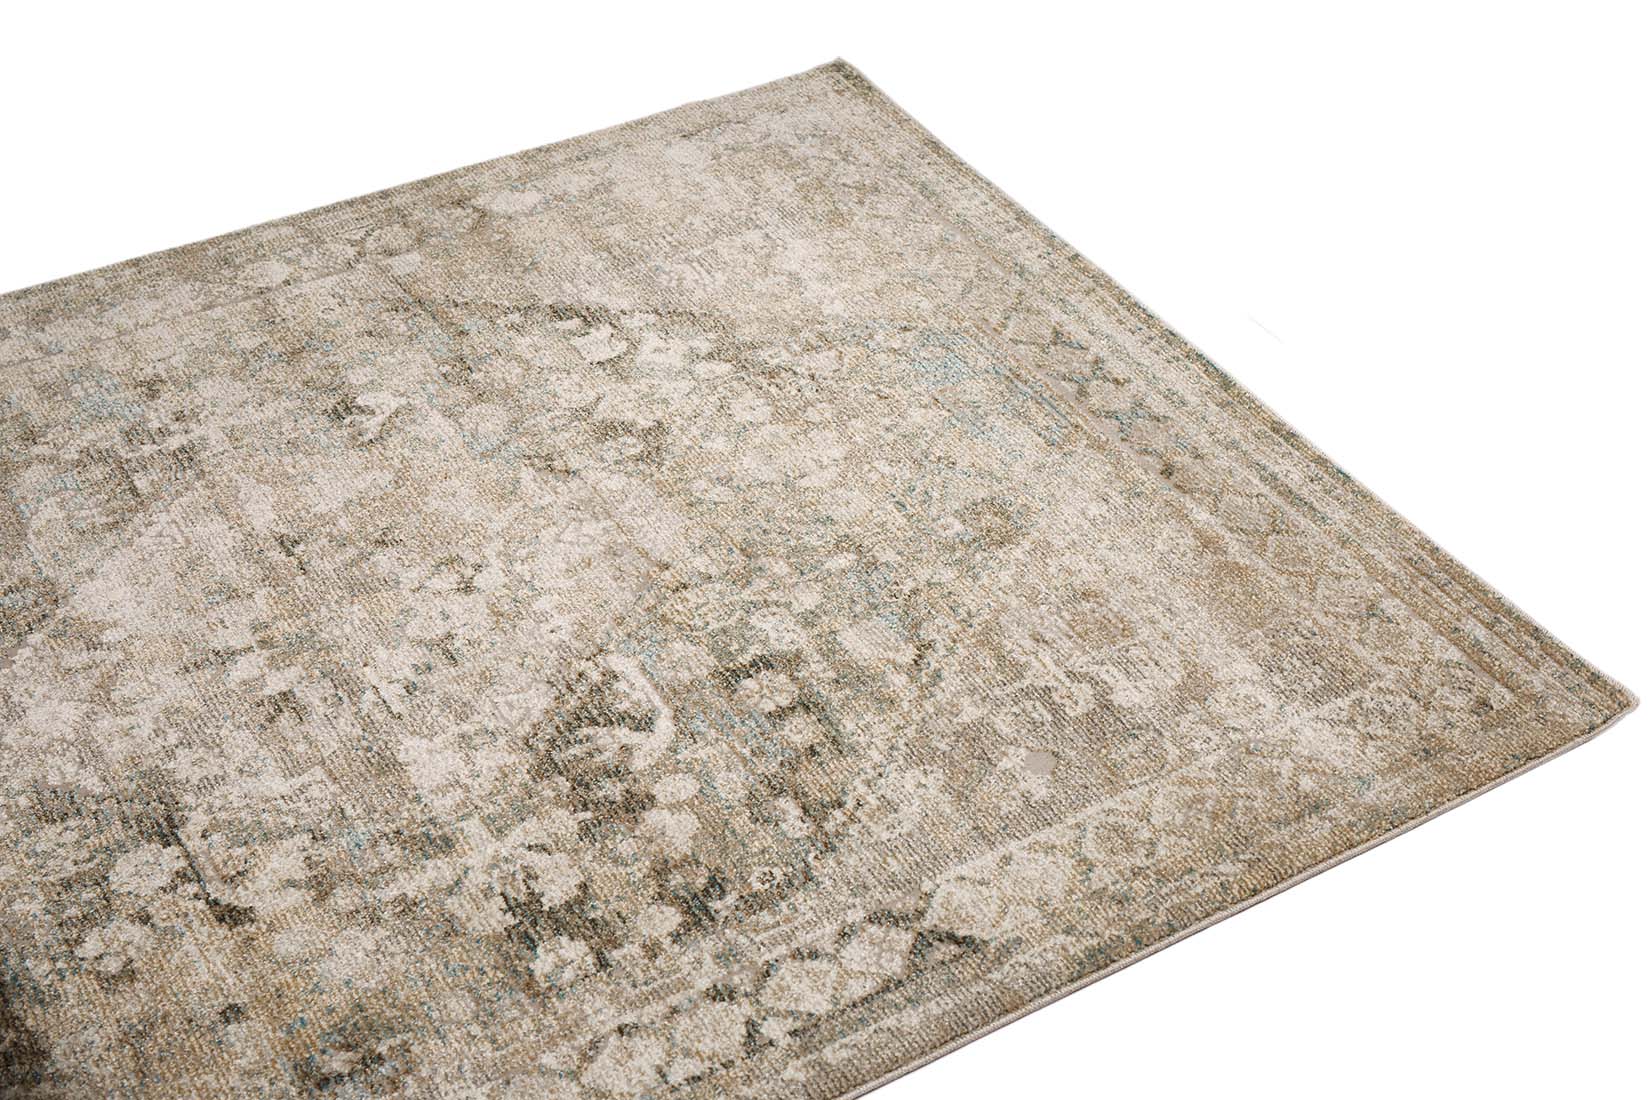 persian inspired area rug in grey, beige, and blue